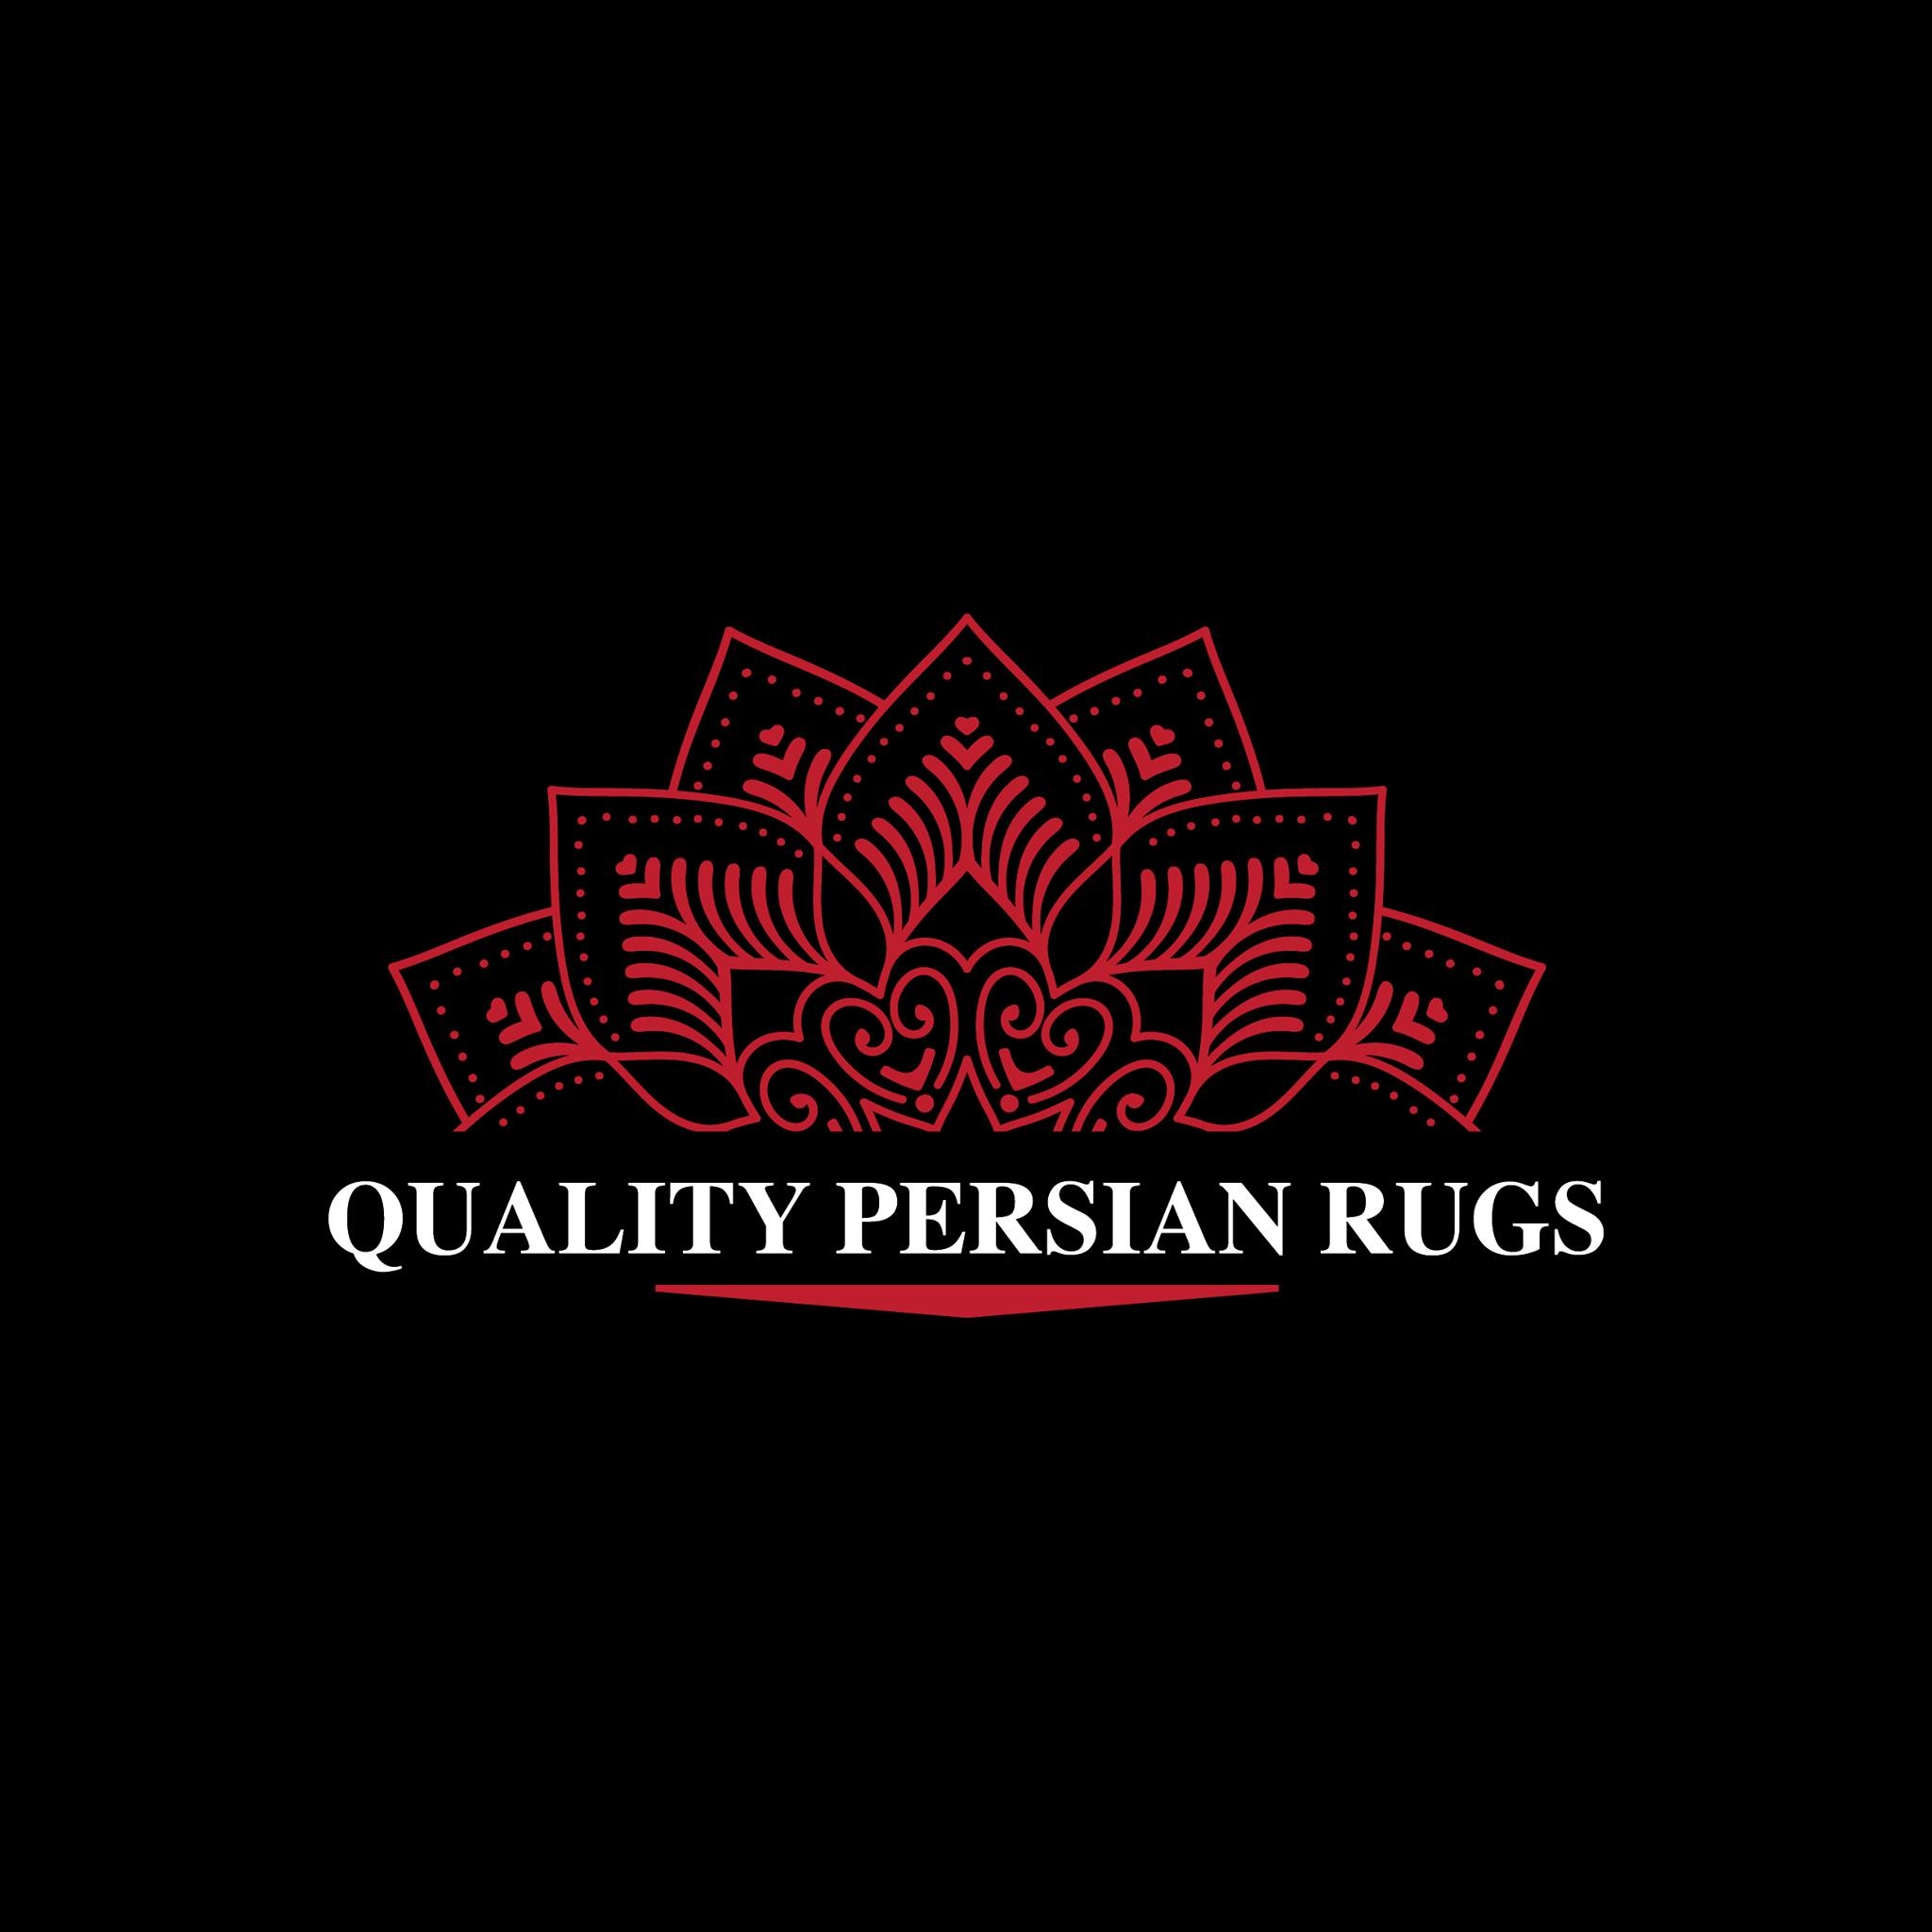 Quality Persian Rugs